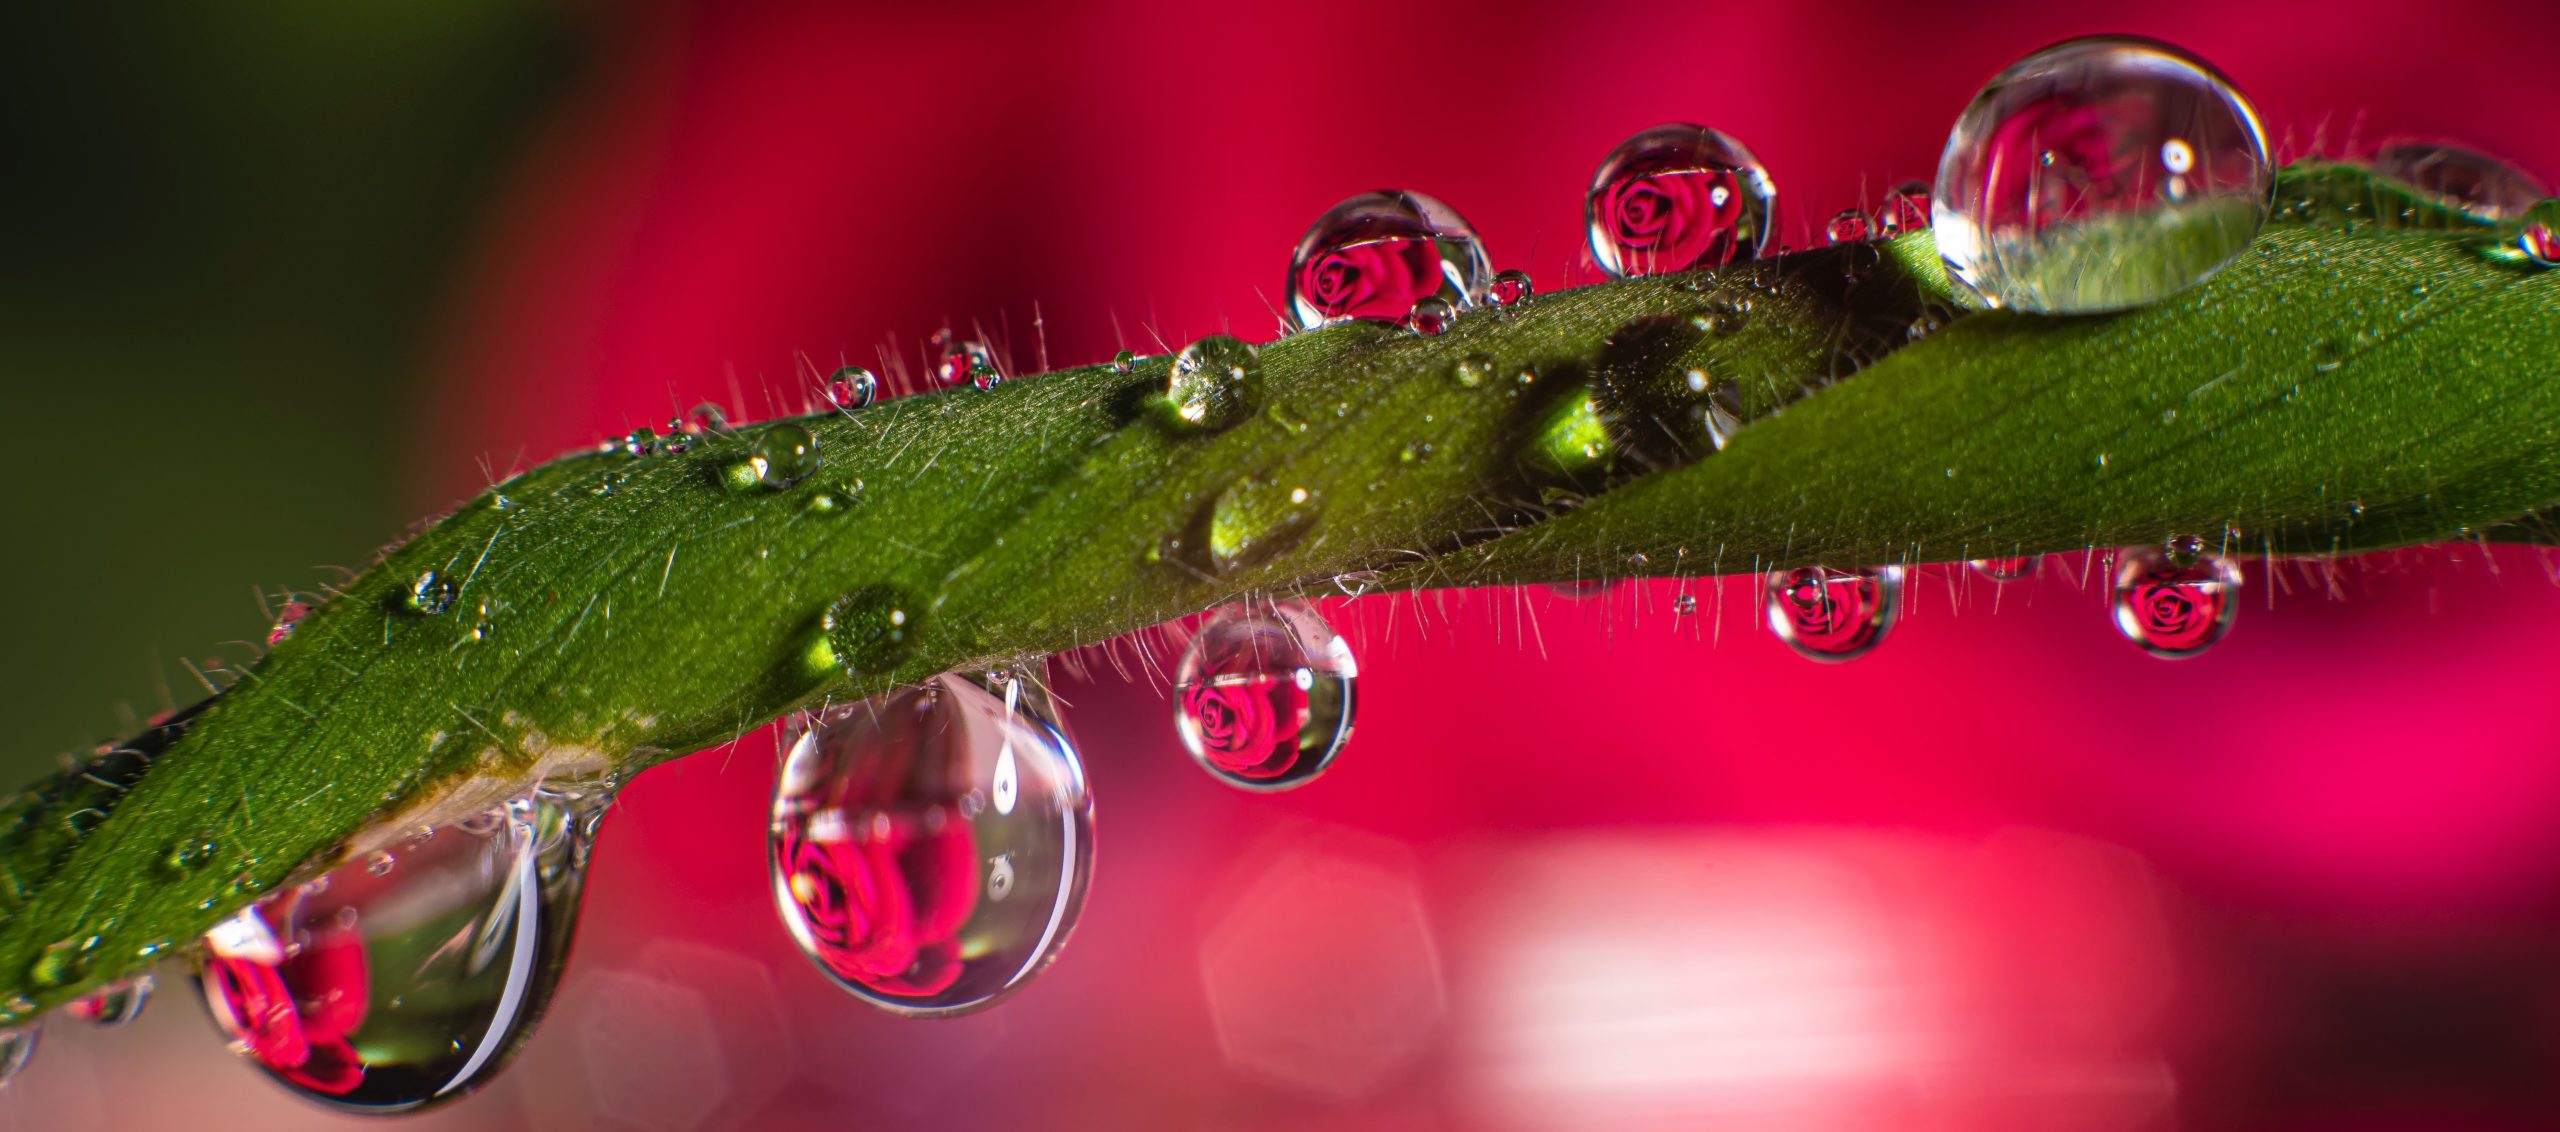 Closeup of a rose leaf with water droplets